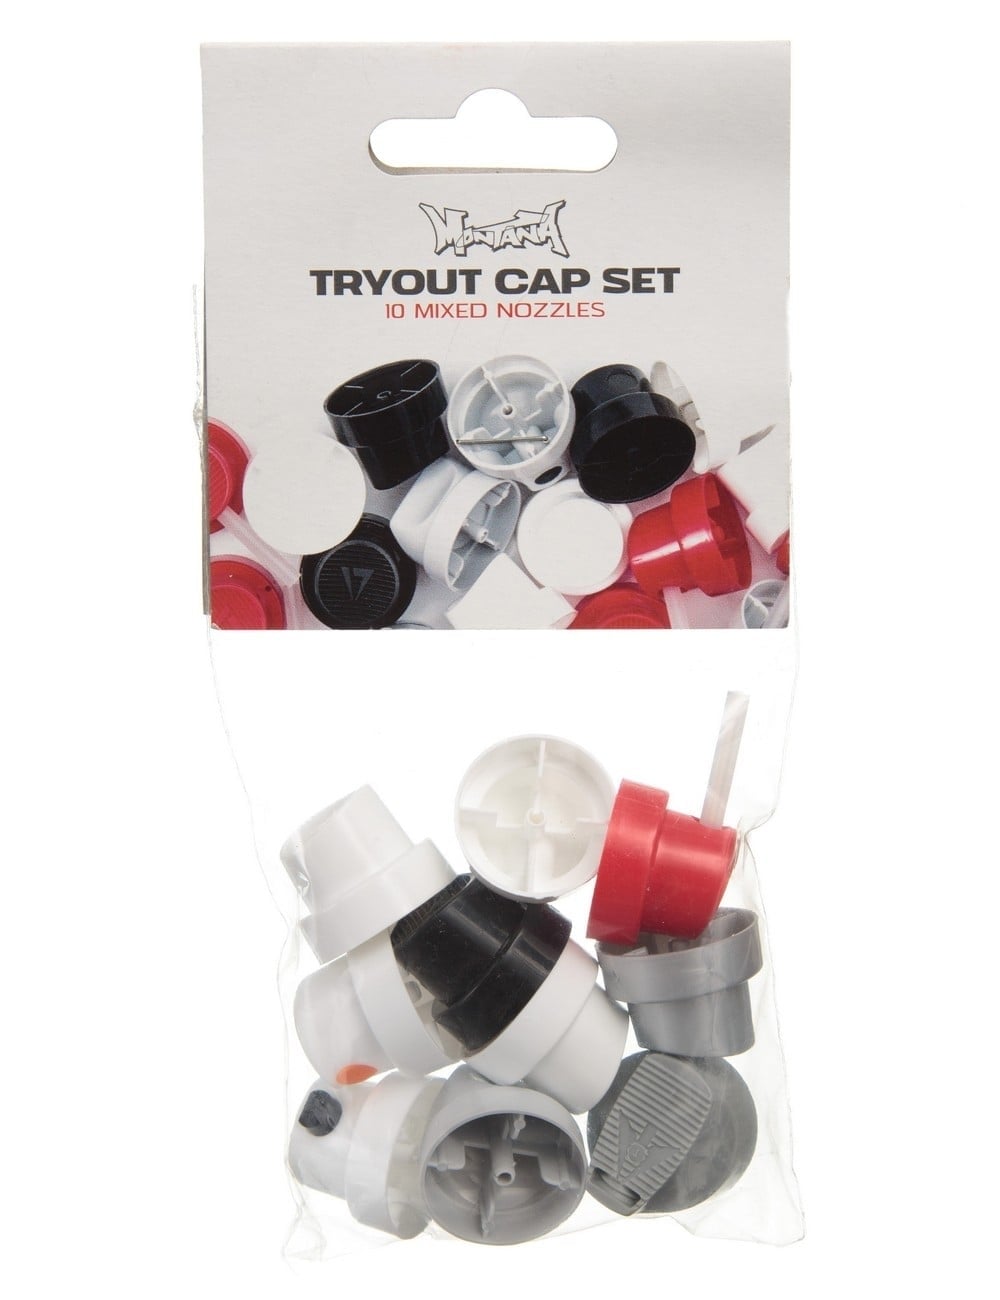 Montana Cans Tryout Cap Set - 10 Mixed Nozzles